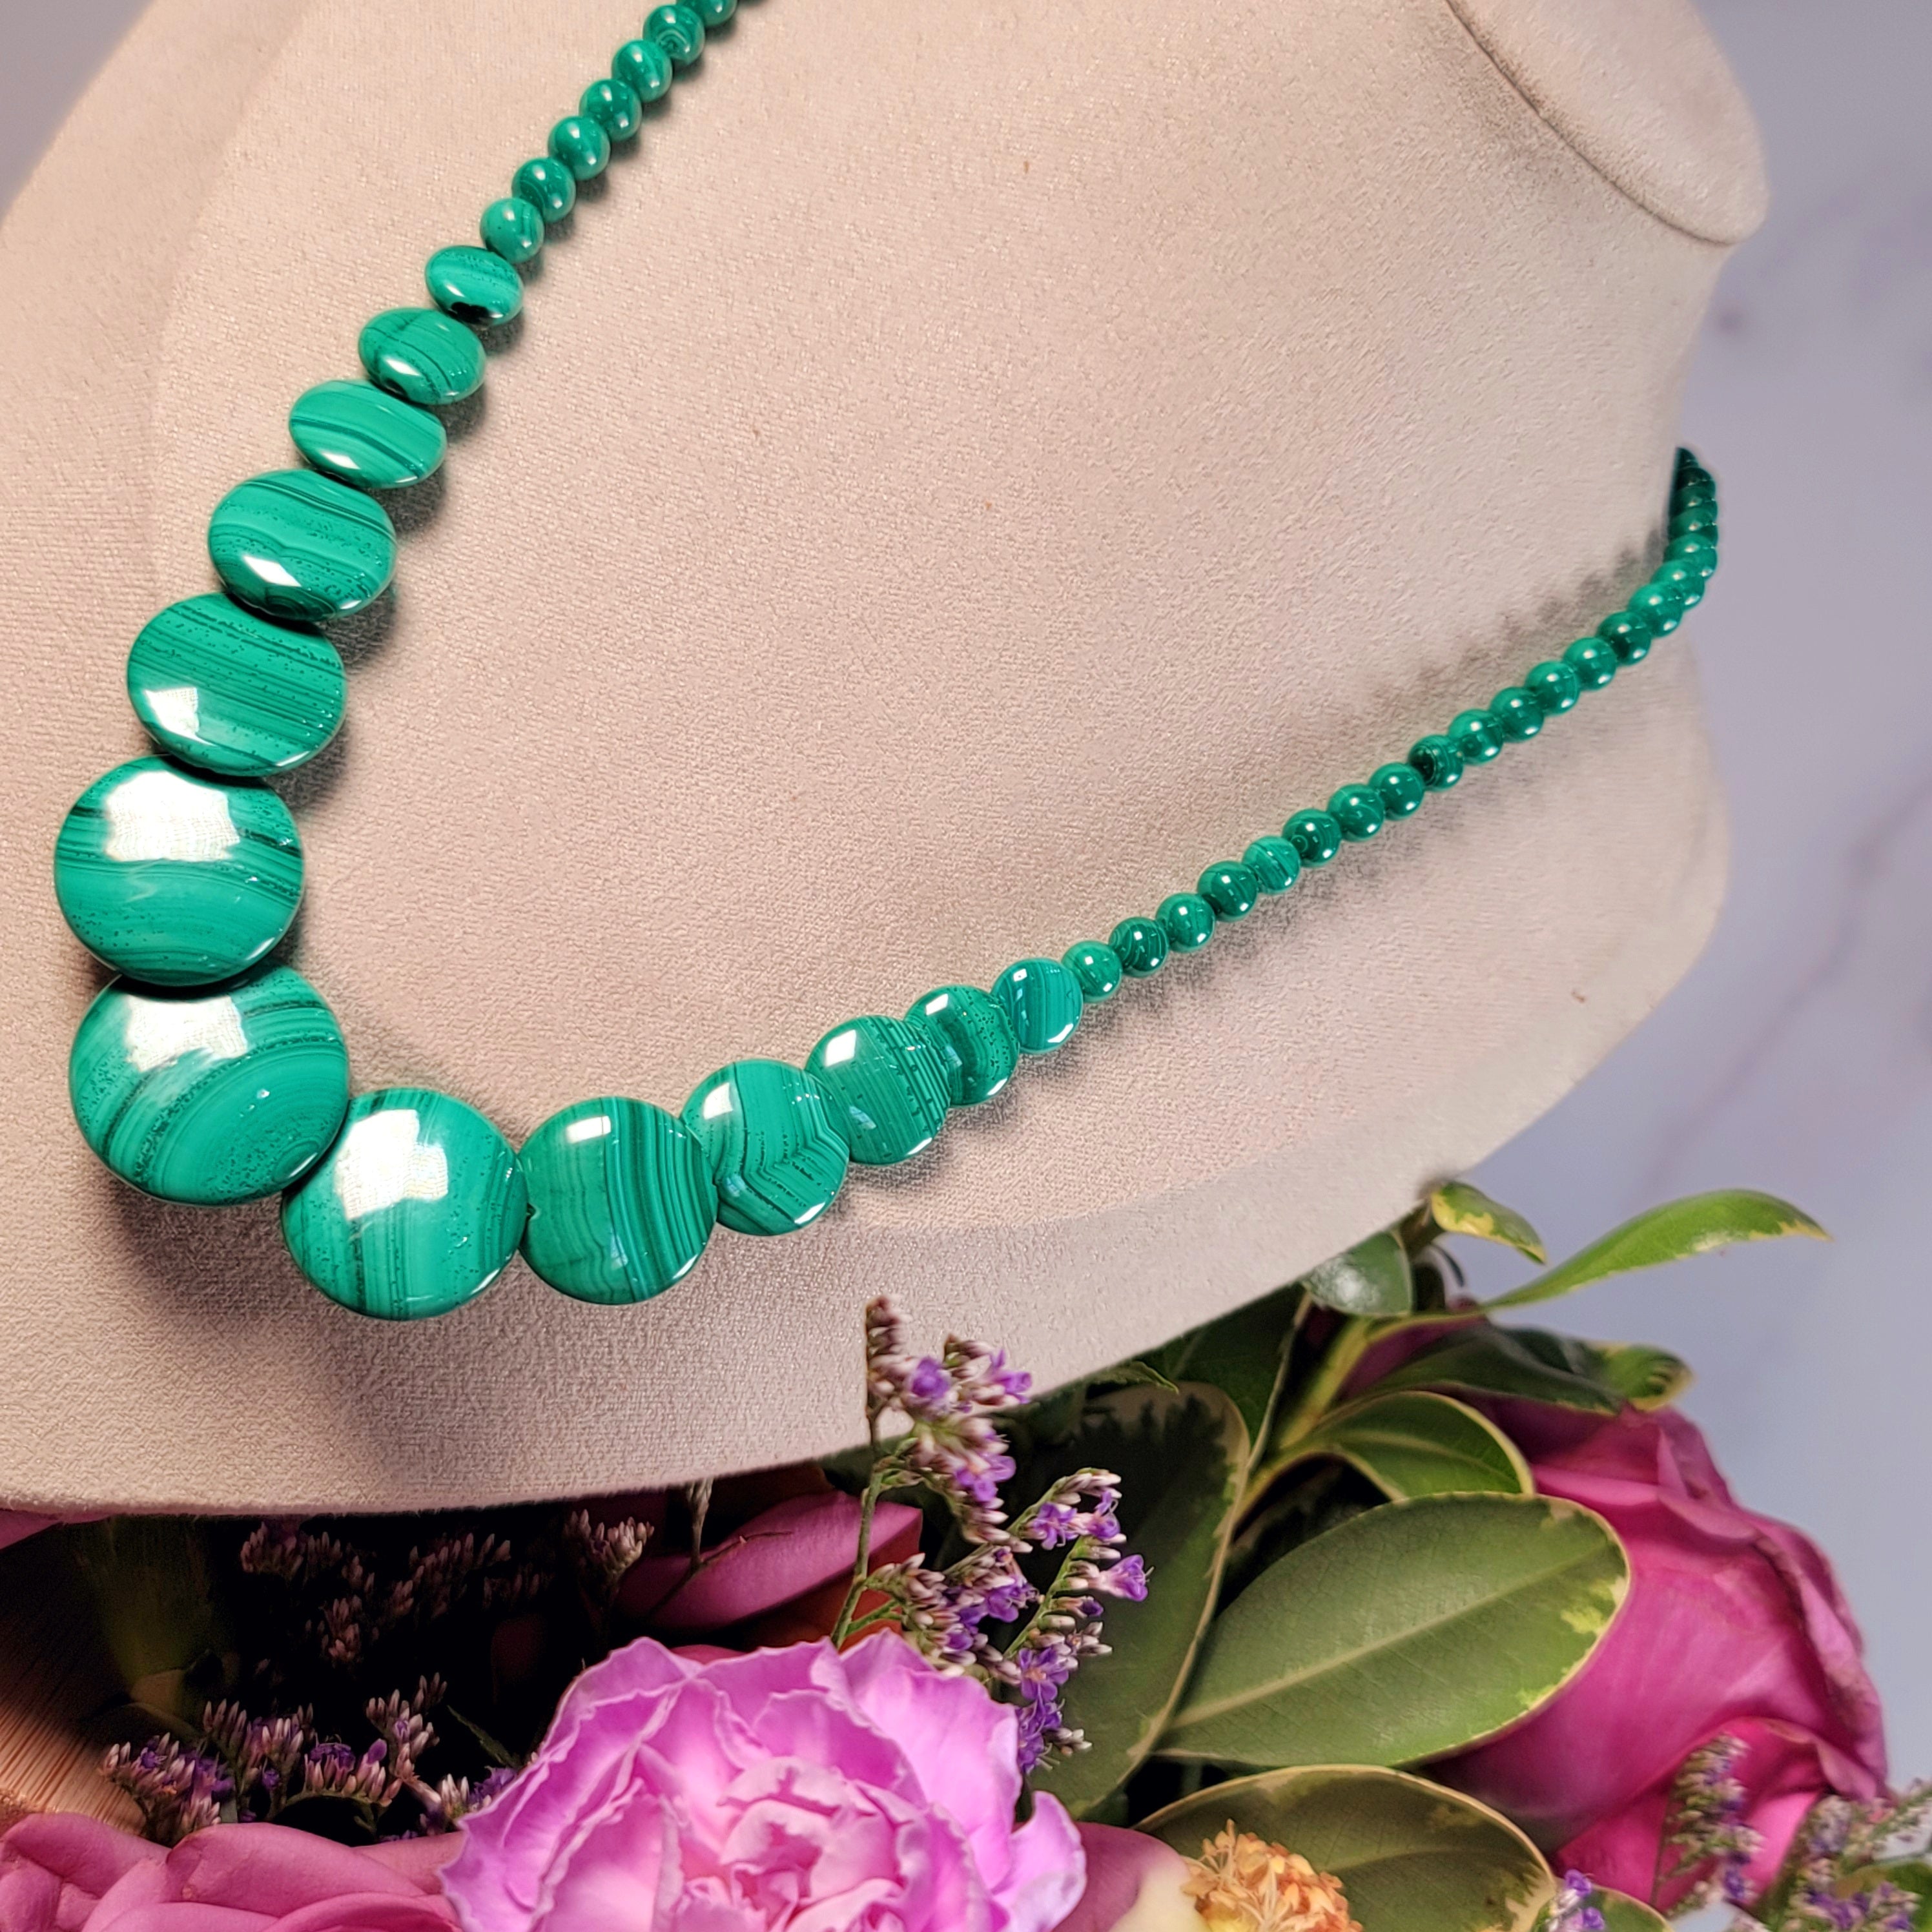 Malachite Necklace for Abundance, Protection and Transformation